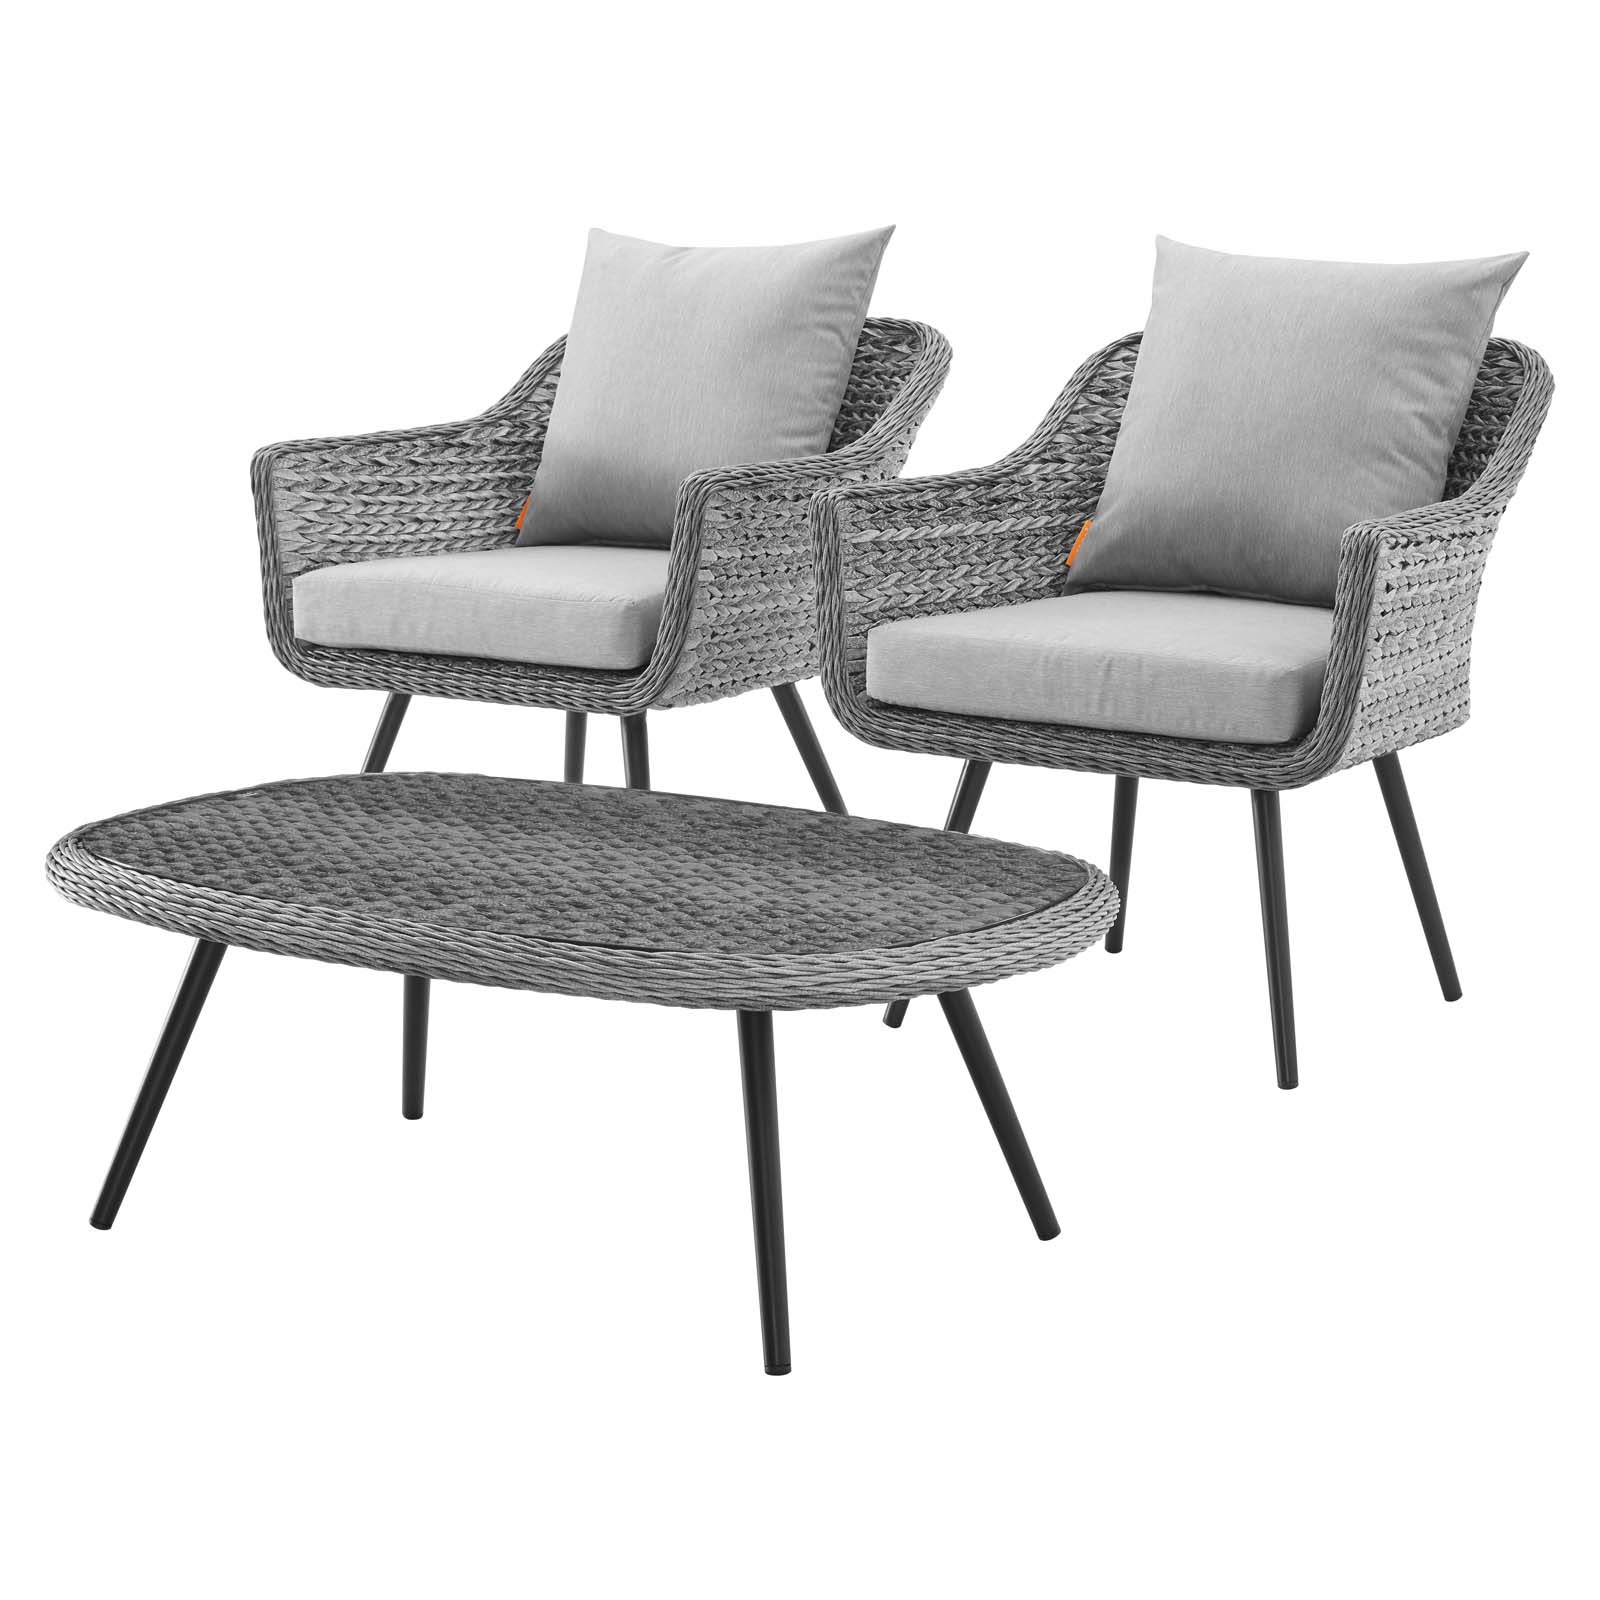 Contemporary Modern Urban Designer Outdoor Patio Balcony Garden Furniture Lounge Chair and Coffee Table Set, Aluminum Fabric Wicker Rattan, Grey Gray - image 1 of 8